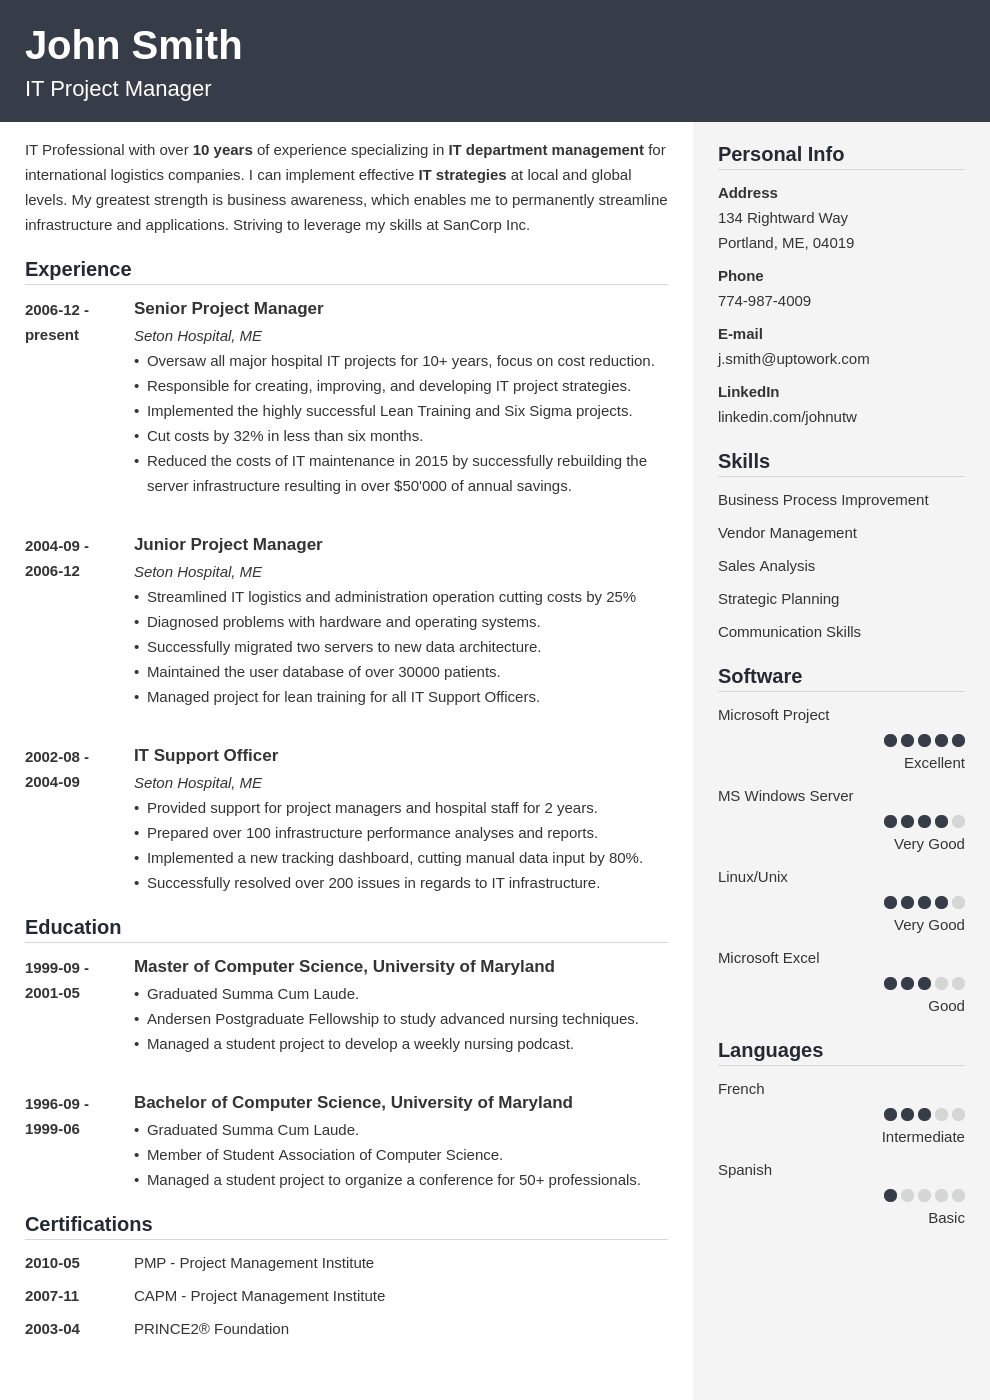 Resume : Coloring Resume Template Microsoft Word Free Intended For Free Printable Resume Templates Microsoft Word